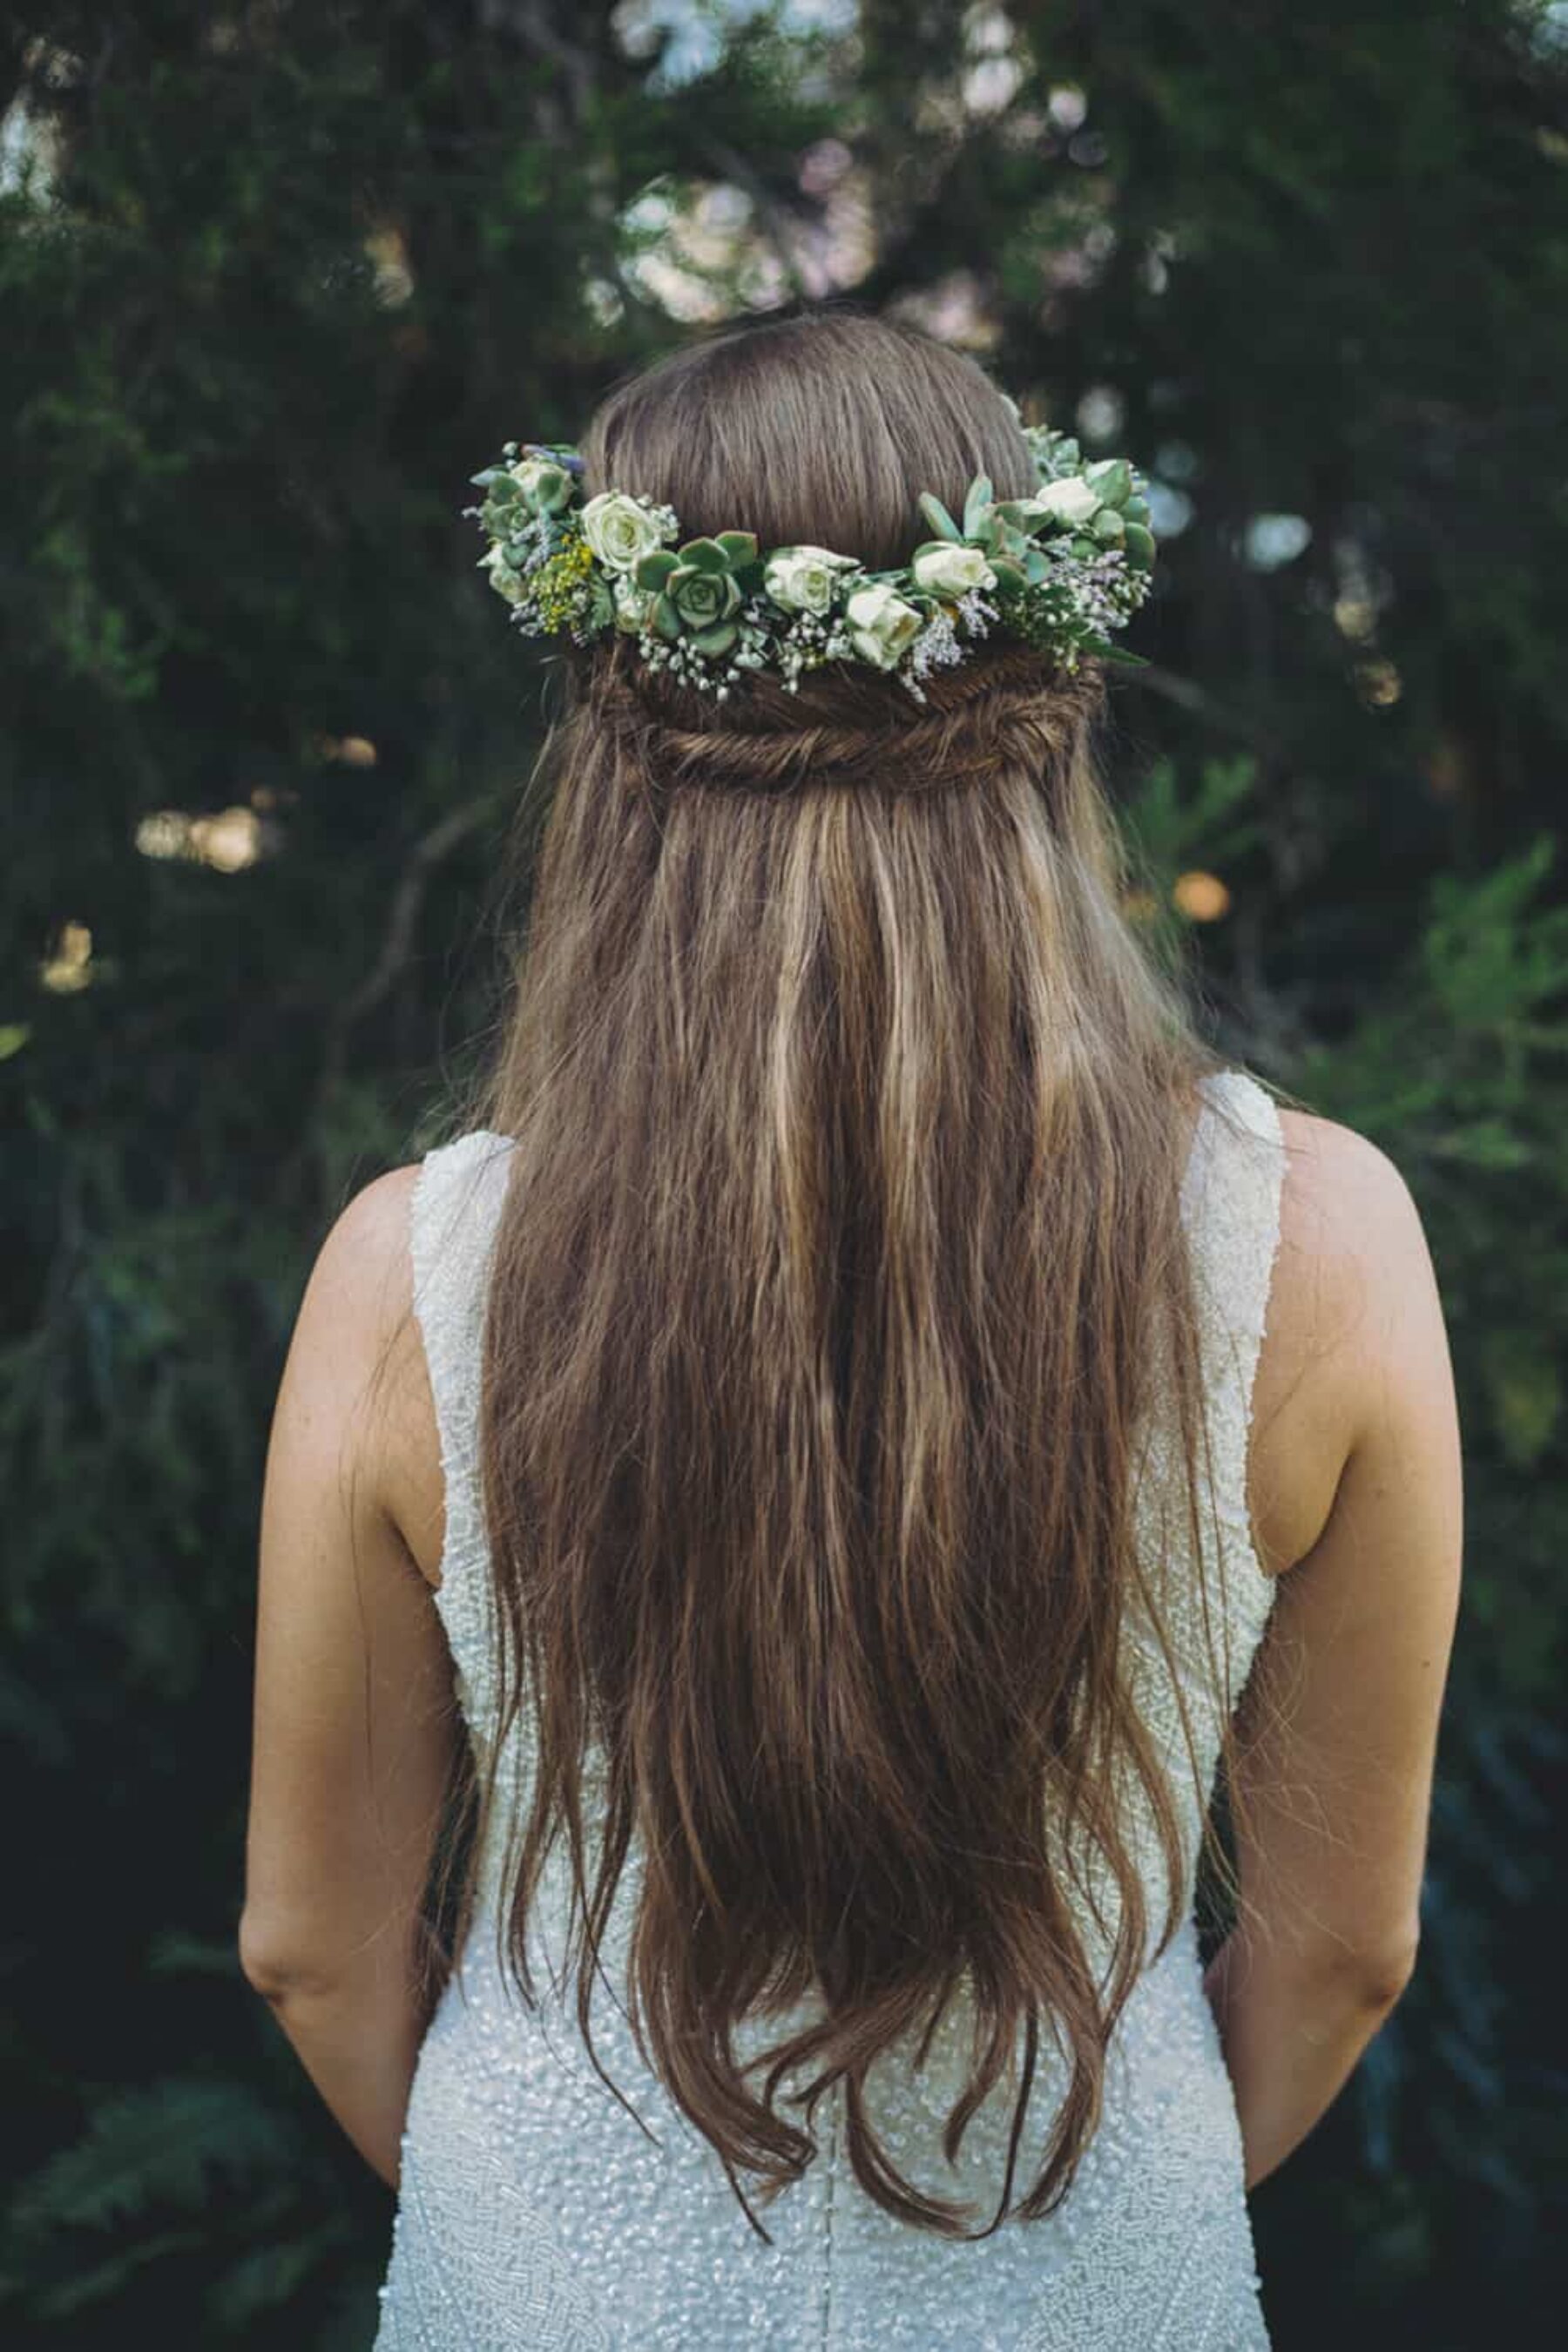 Fishtail braid with succulent flower crown